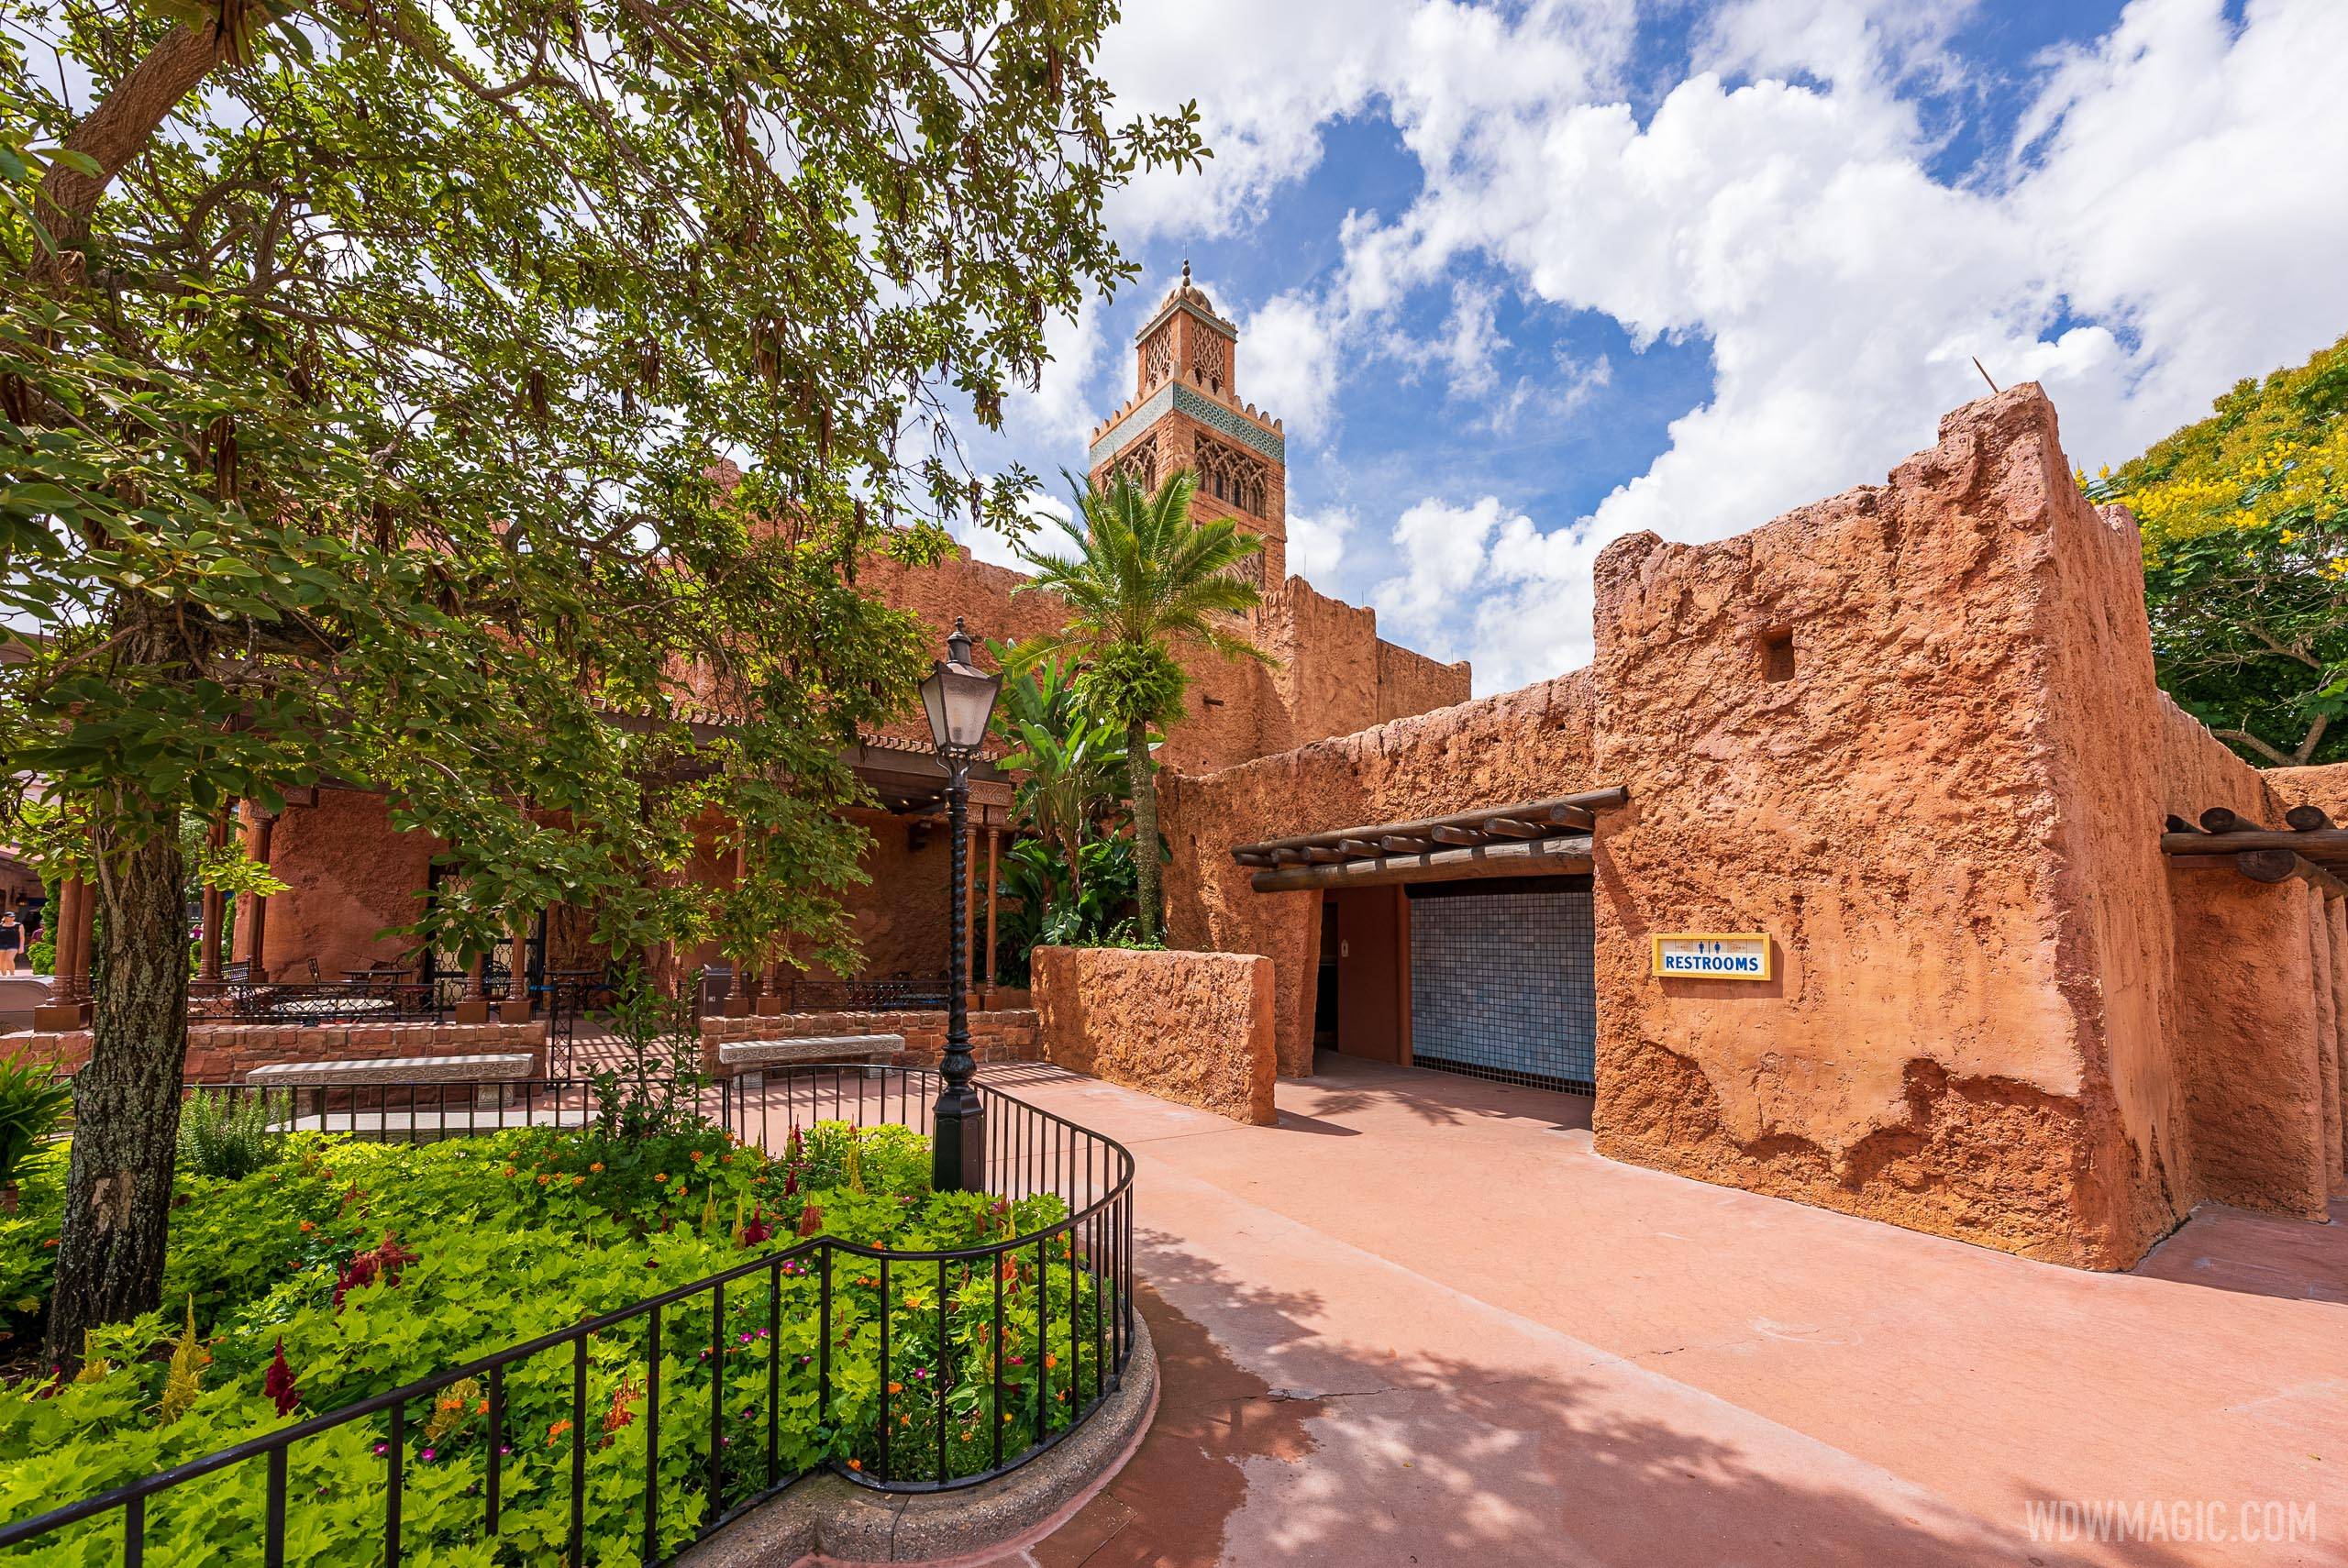 Morocco Pavilion's new-look restrooms reopen in World Showcase at EPCOT